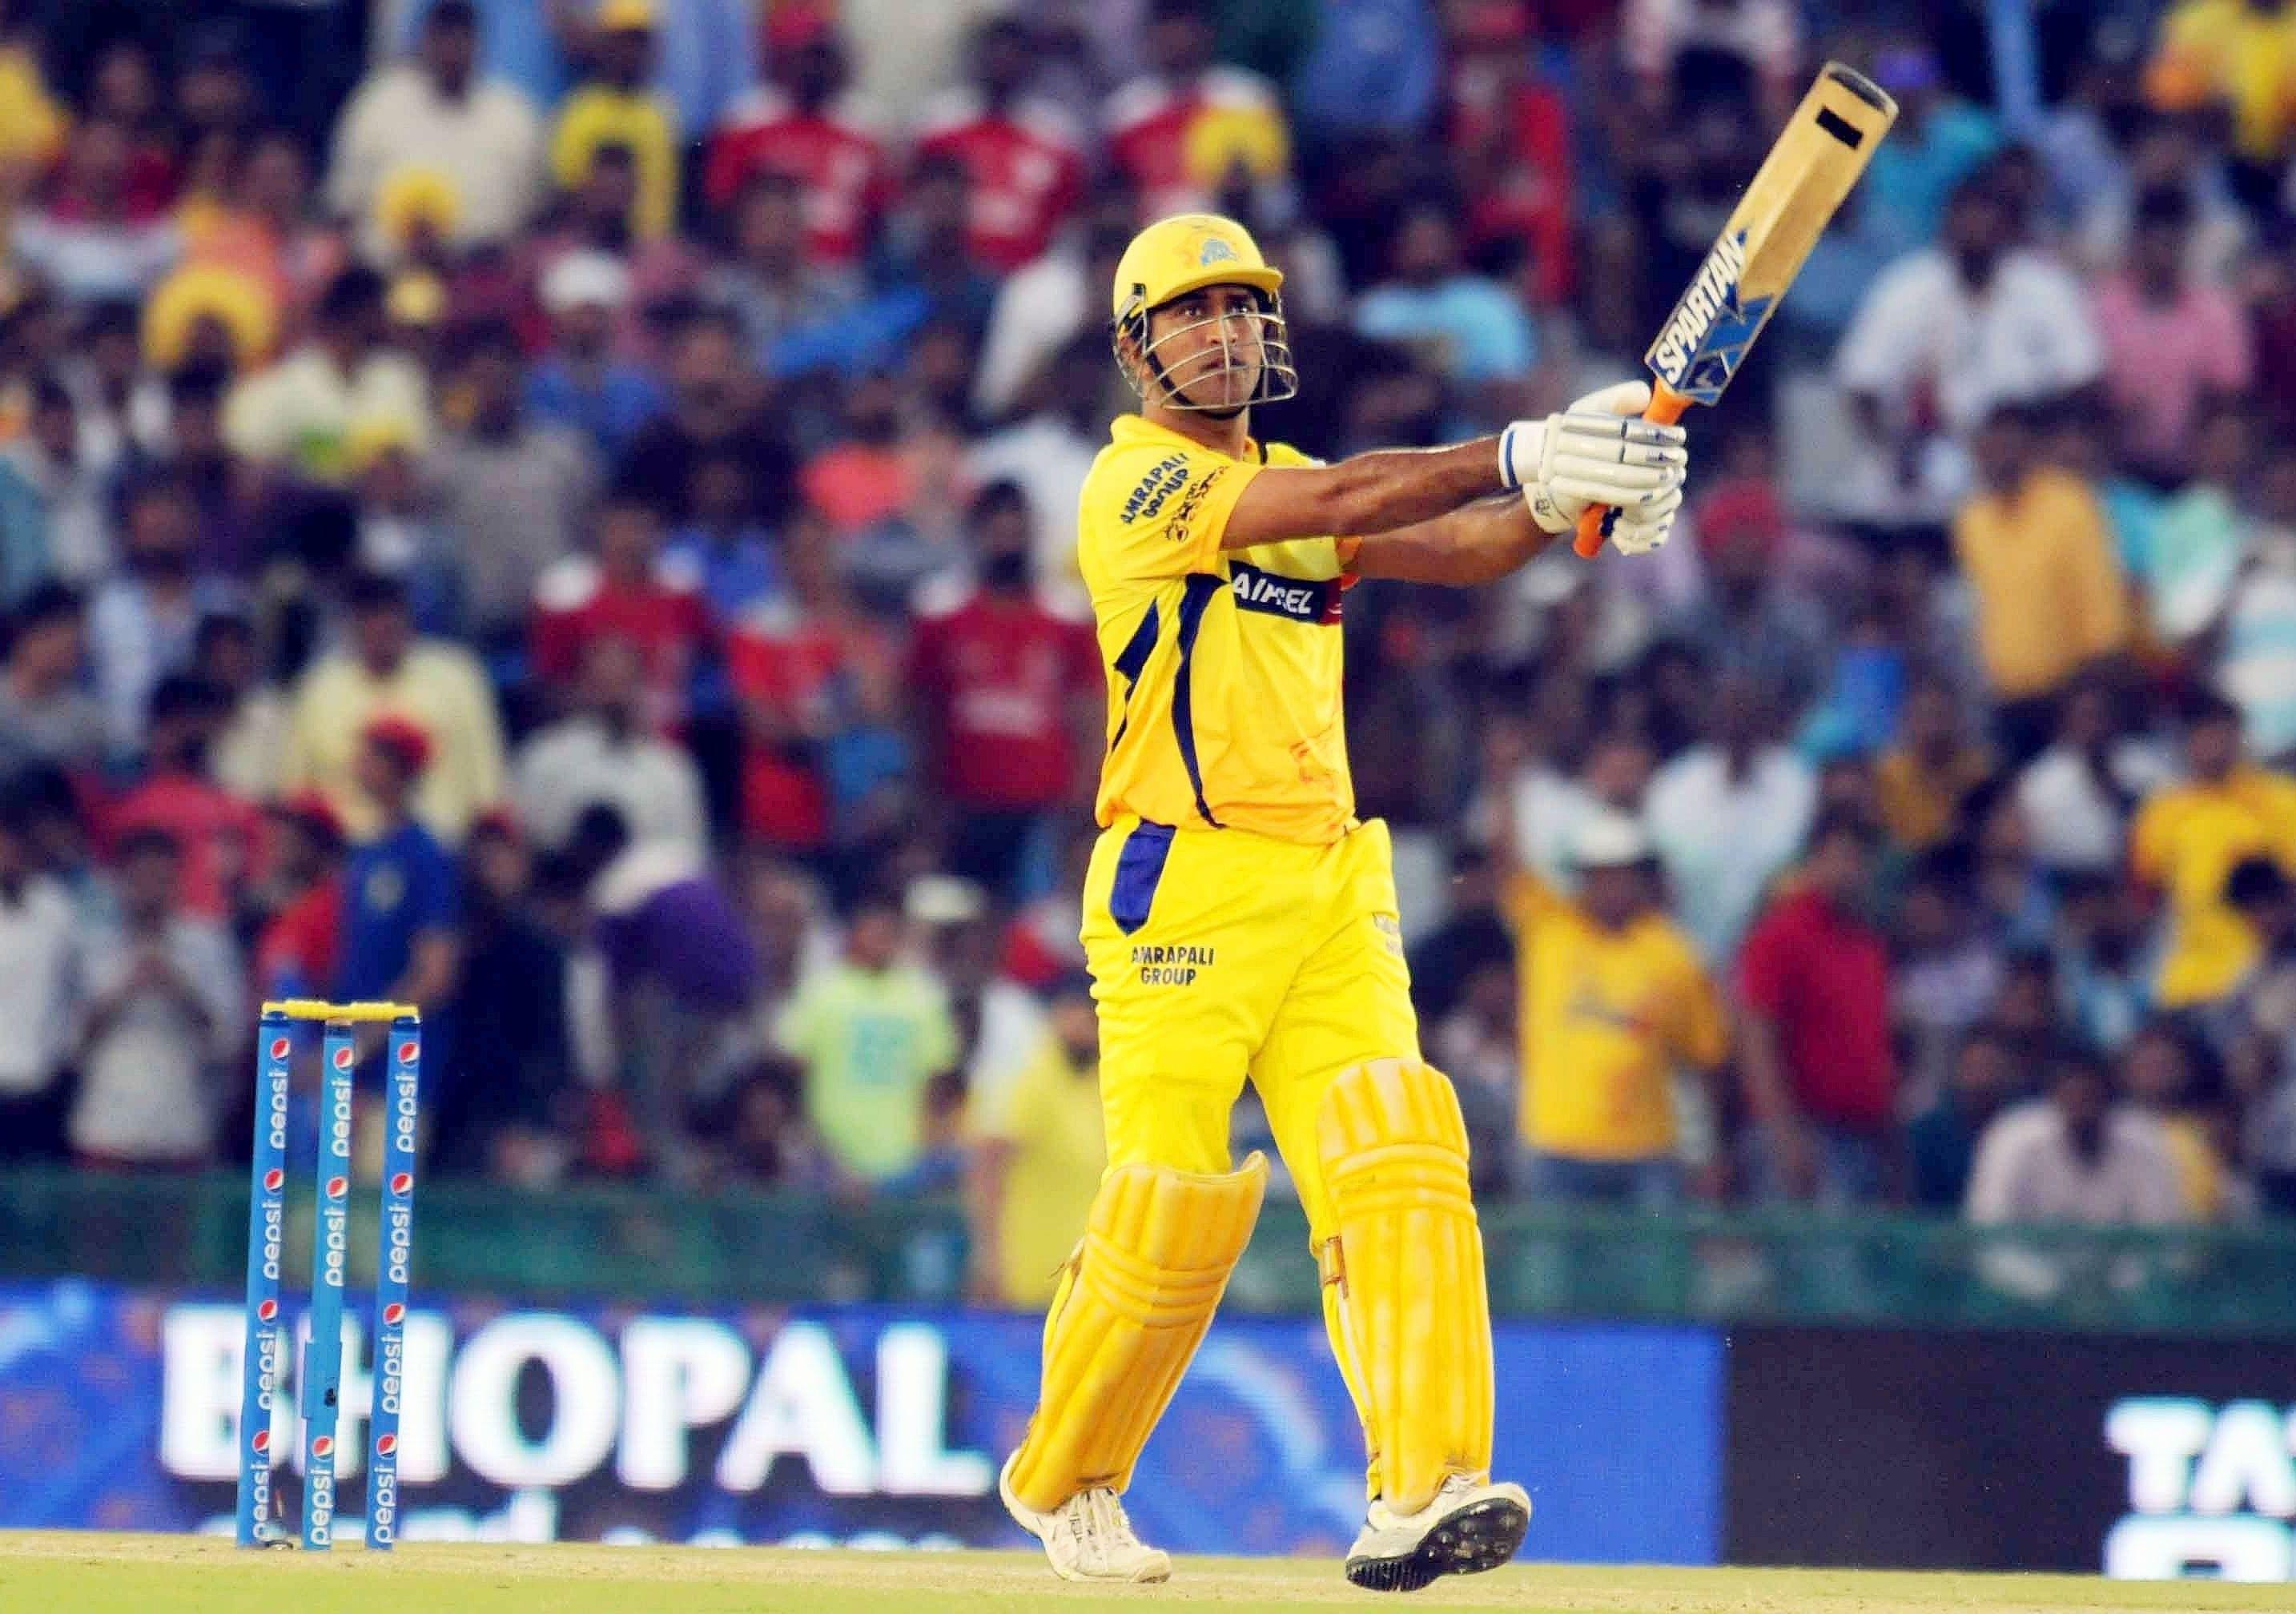 images Ms Dhoni Wallpaper Hd Csk